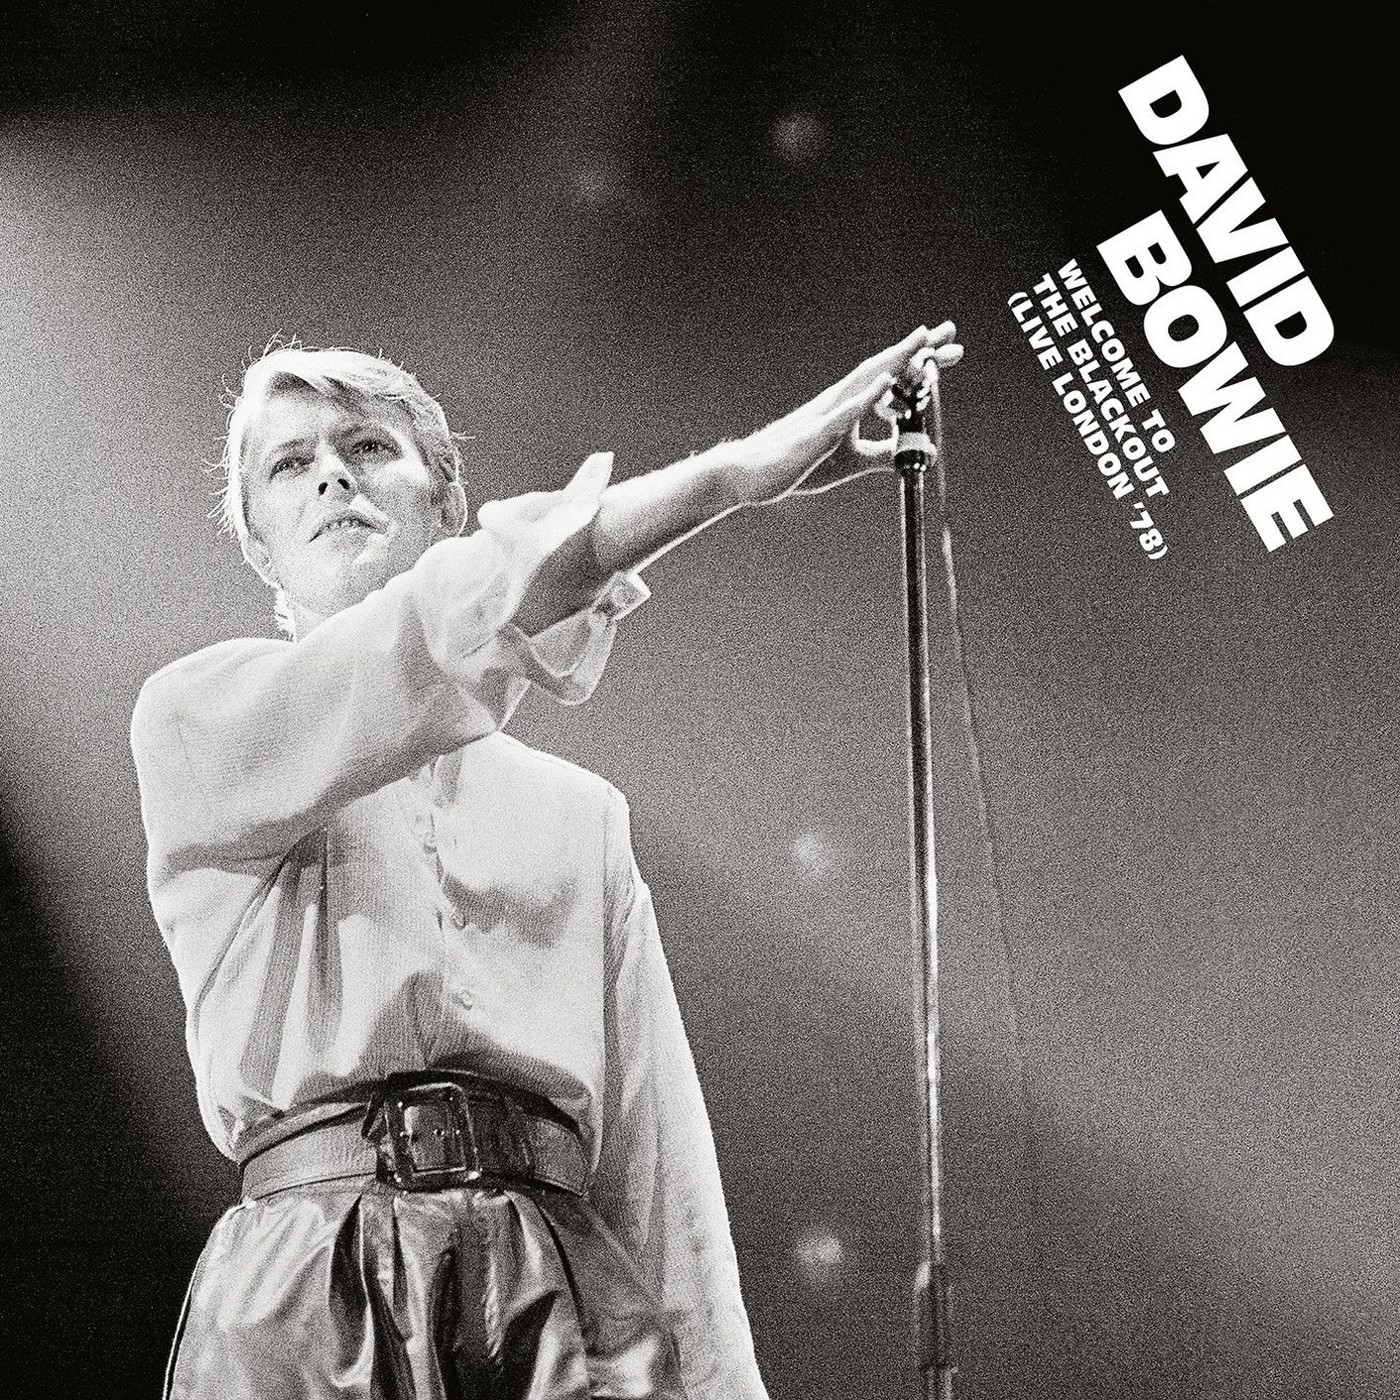 David Bowie – Welcome to the Blackout (Live in London ’78) (2018) [Qobuz FLAC 24bit/96kHz]